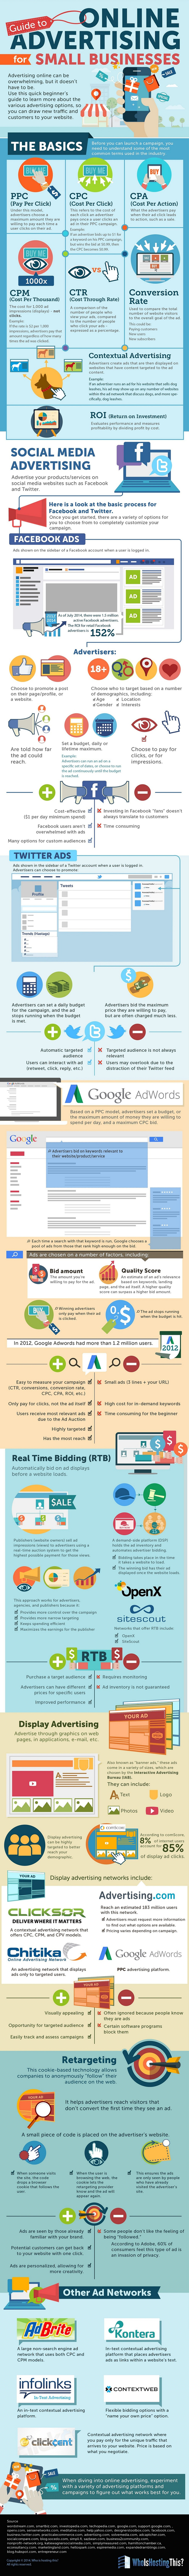 Guide To Online Advertising For Small Businesses - #infographic